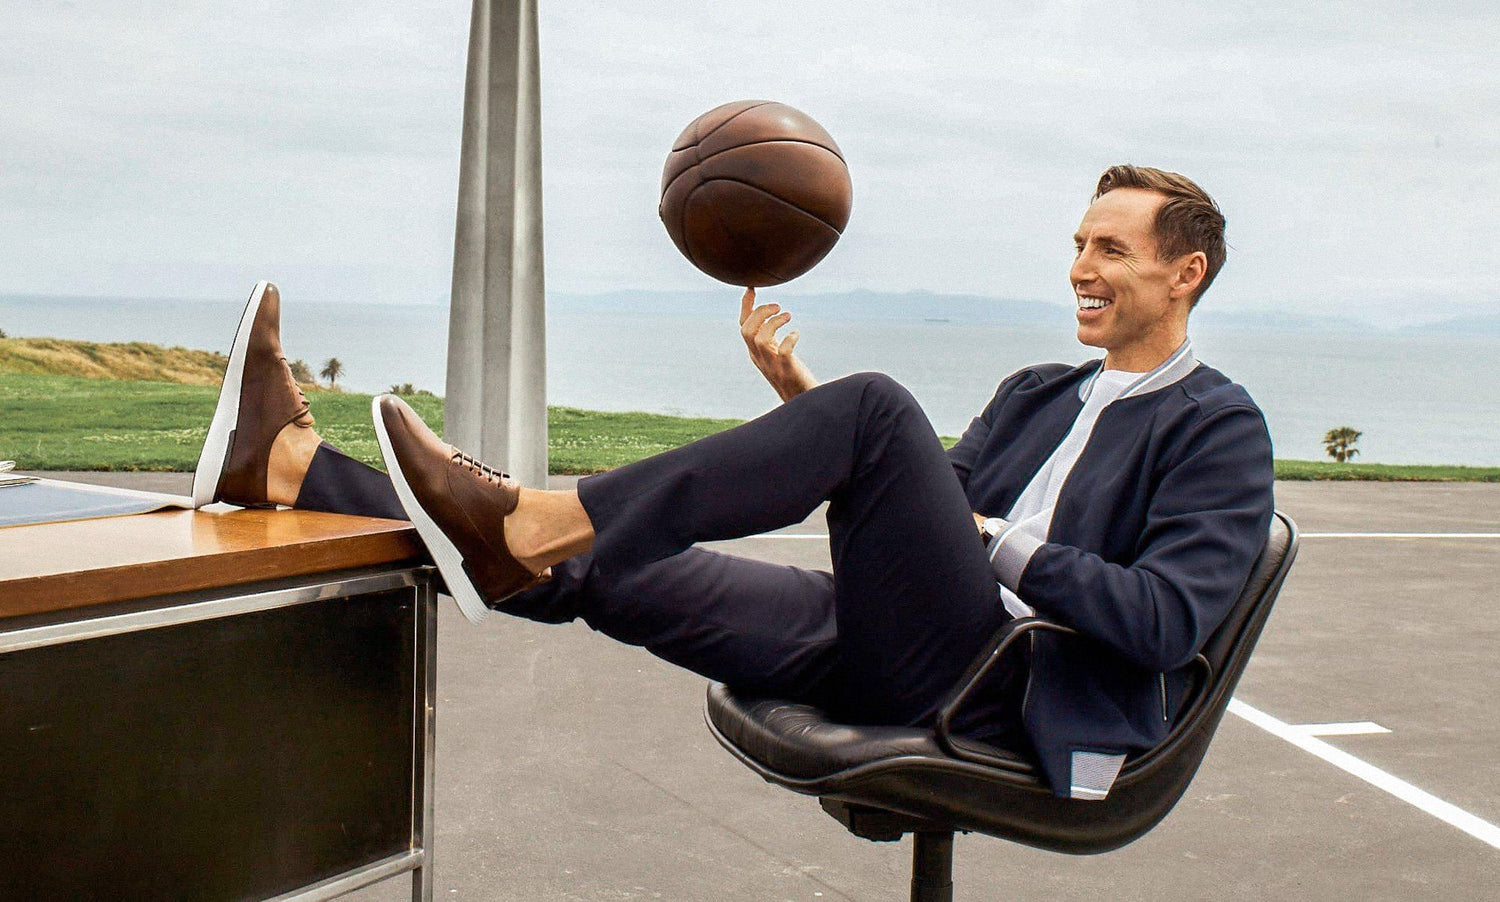 Man spinning basketball in index finger while leaning back in an office chair with his feet up on a desk. He is wearing leather dress shoes. 